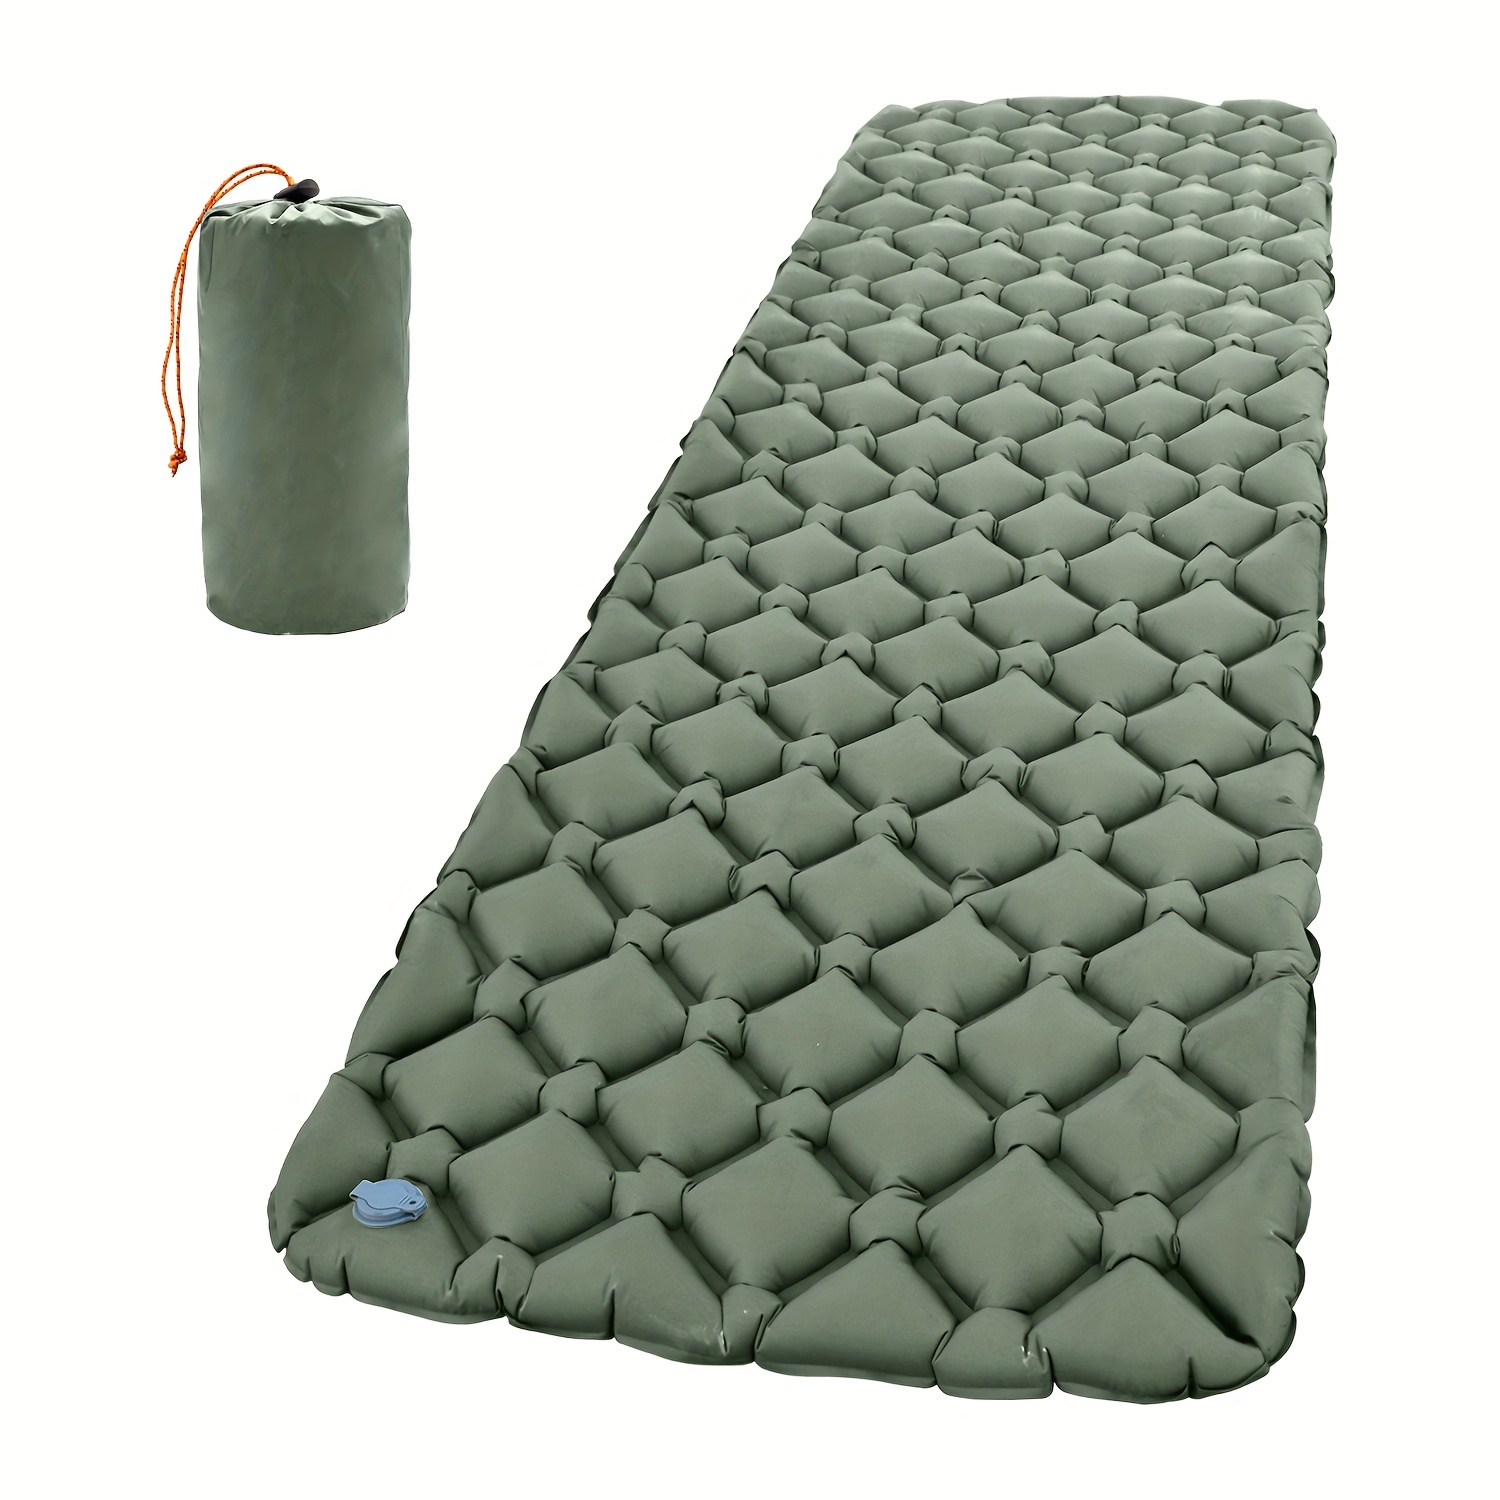 Camping Insulated Sleeping Pad, Ultralight Inflatable Air Sleeping Mat For  Camping,Backpacking,Hiking,Traveling, Camp Mattress